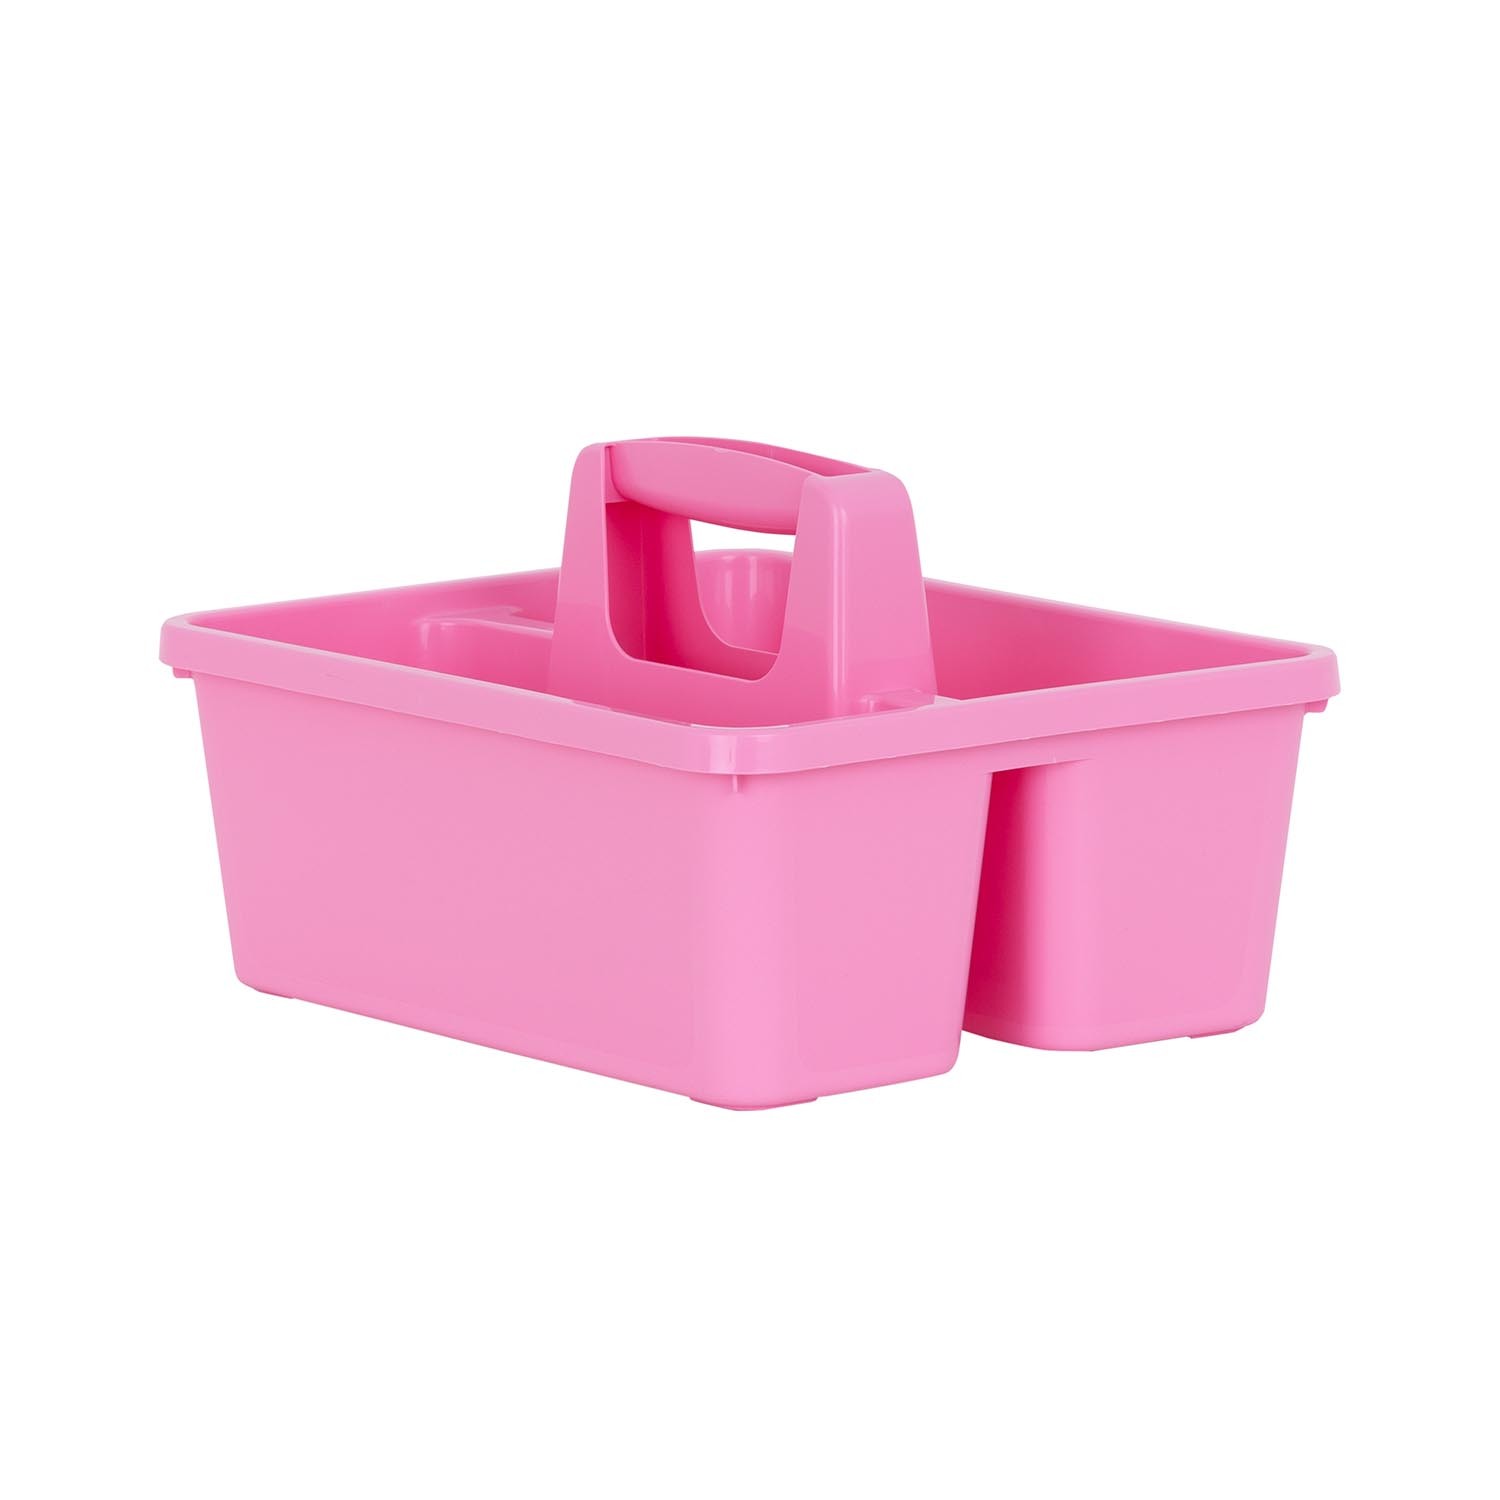 Wham 2 Compartment Kitchen Caddy - Pink Image 1